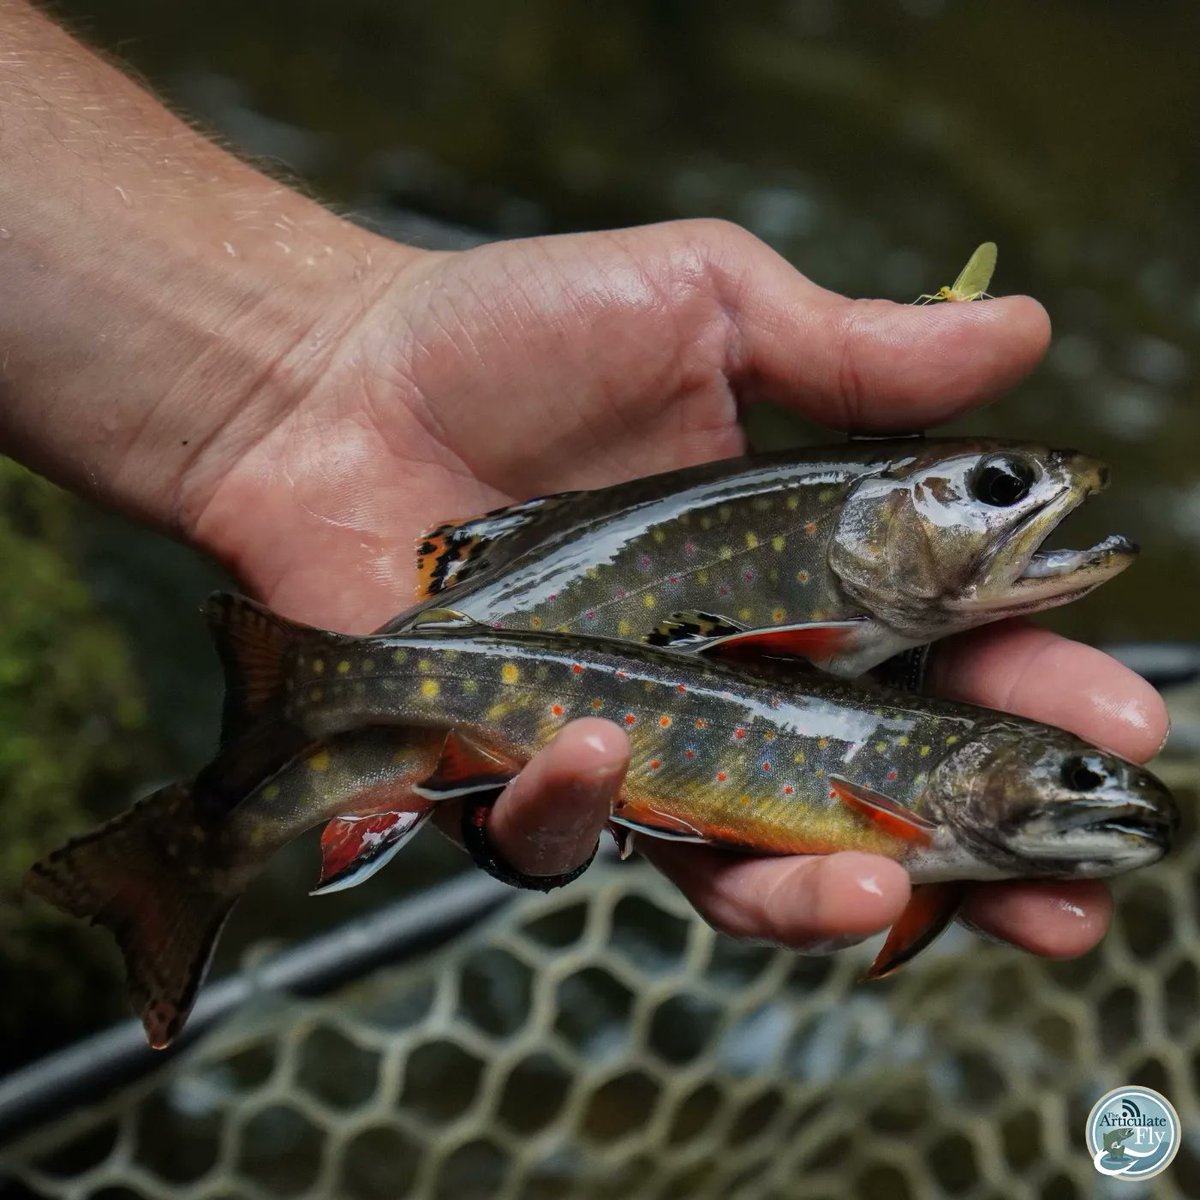 Central VA Fishing Report with Ethan Martin of TaleTellers Fly Shop 
#flyfishing #flytying #thearticulatefly #taletellersflyshop #flyshop #flyfishva #downtownlynchburg bit.ly/42ICevP